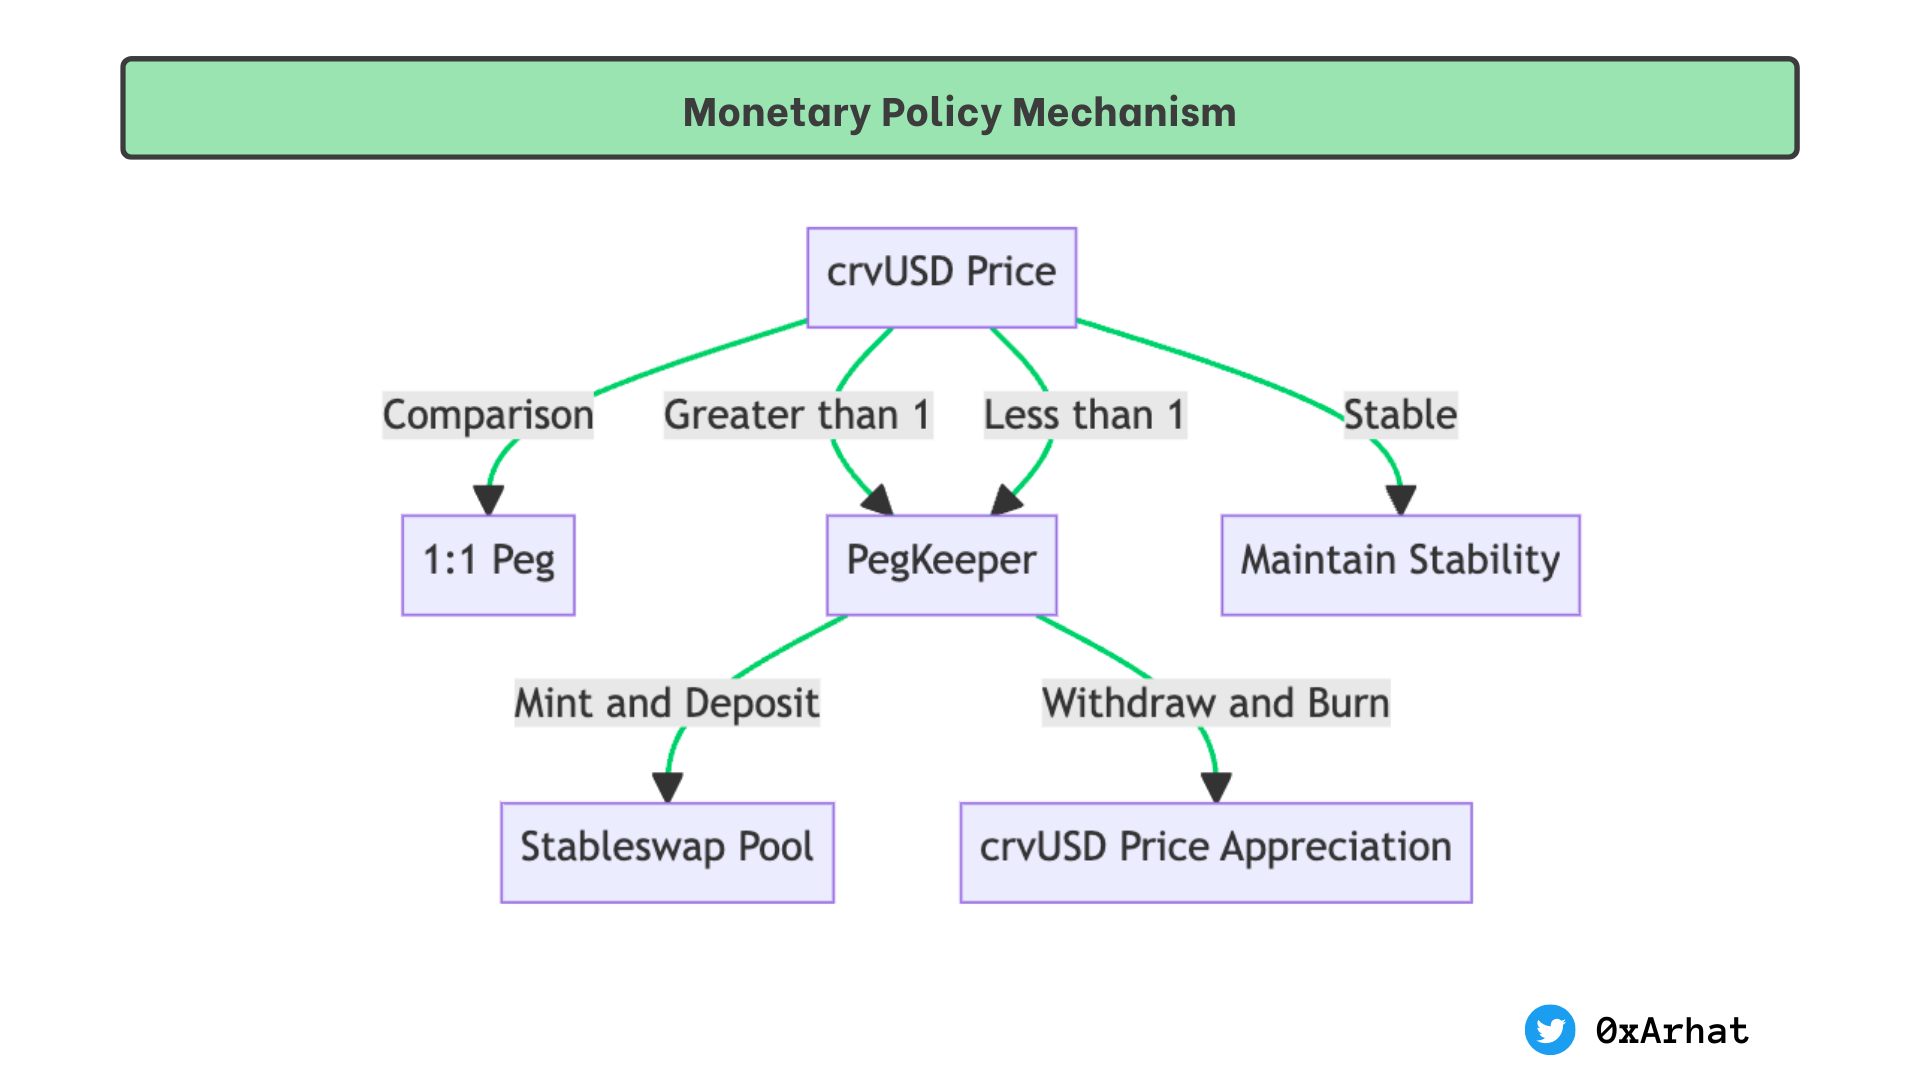 Monetary Policy is responsible for maintaining the crvUSD's long-term stability and value.